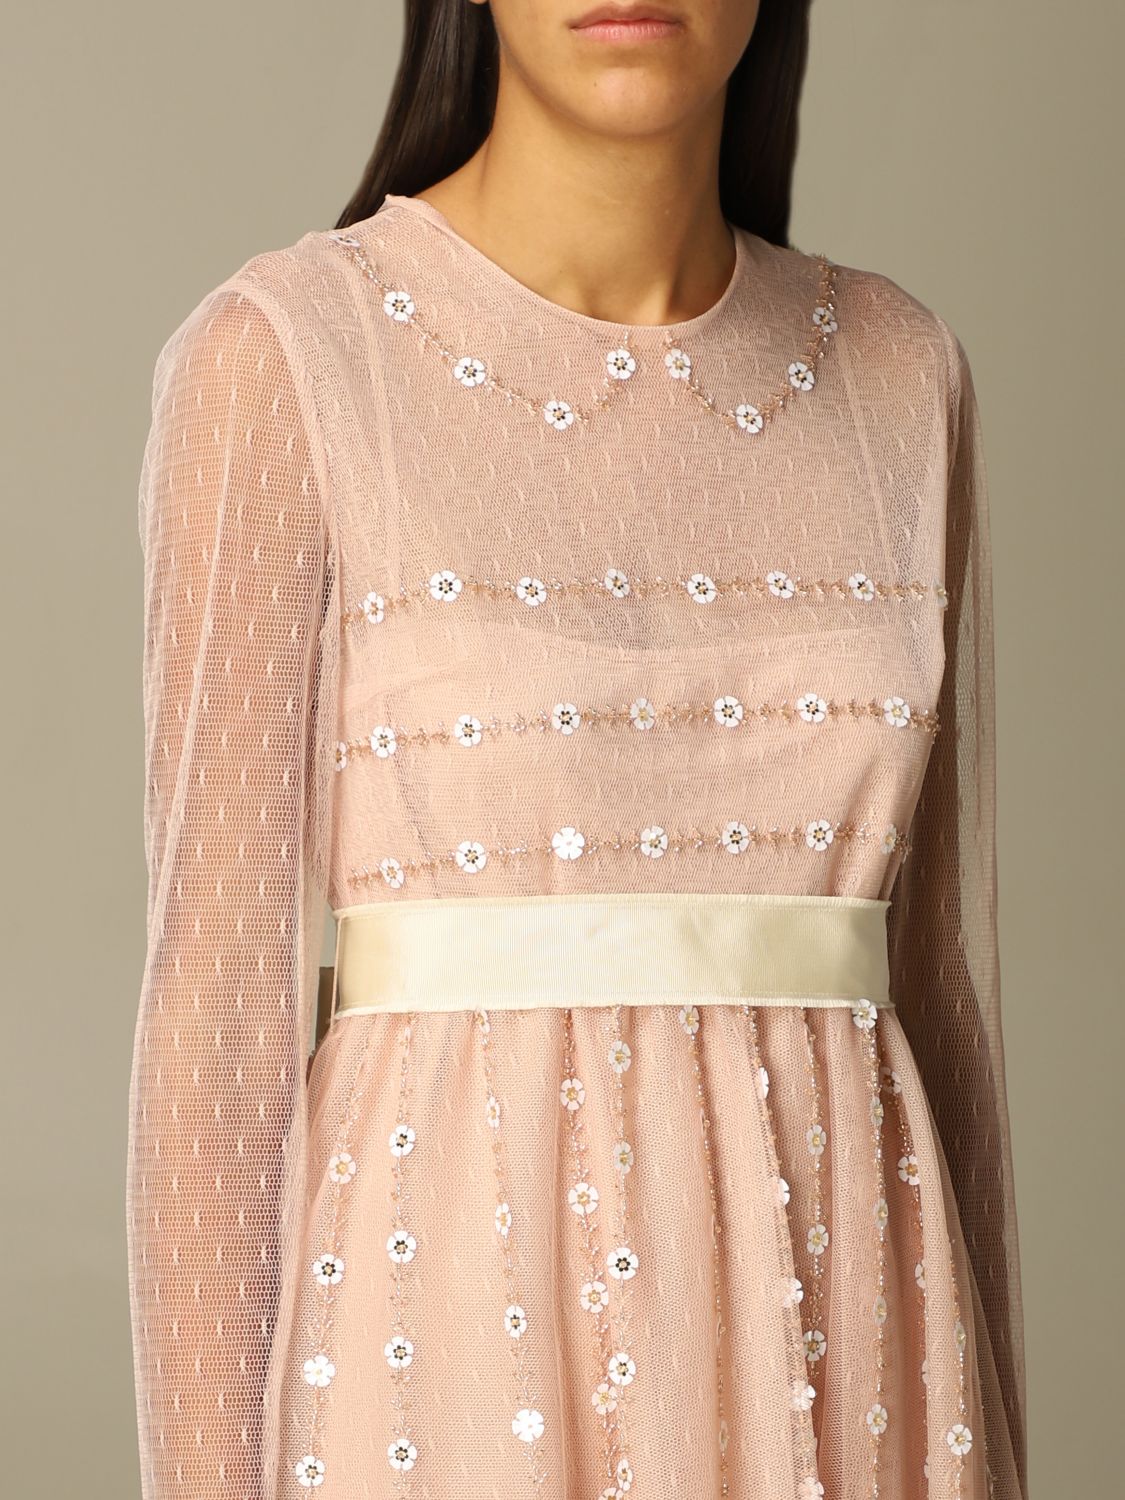 Red Valentino Outlet: Dress women | Dress Red Valentino Women Pink